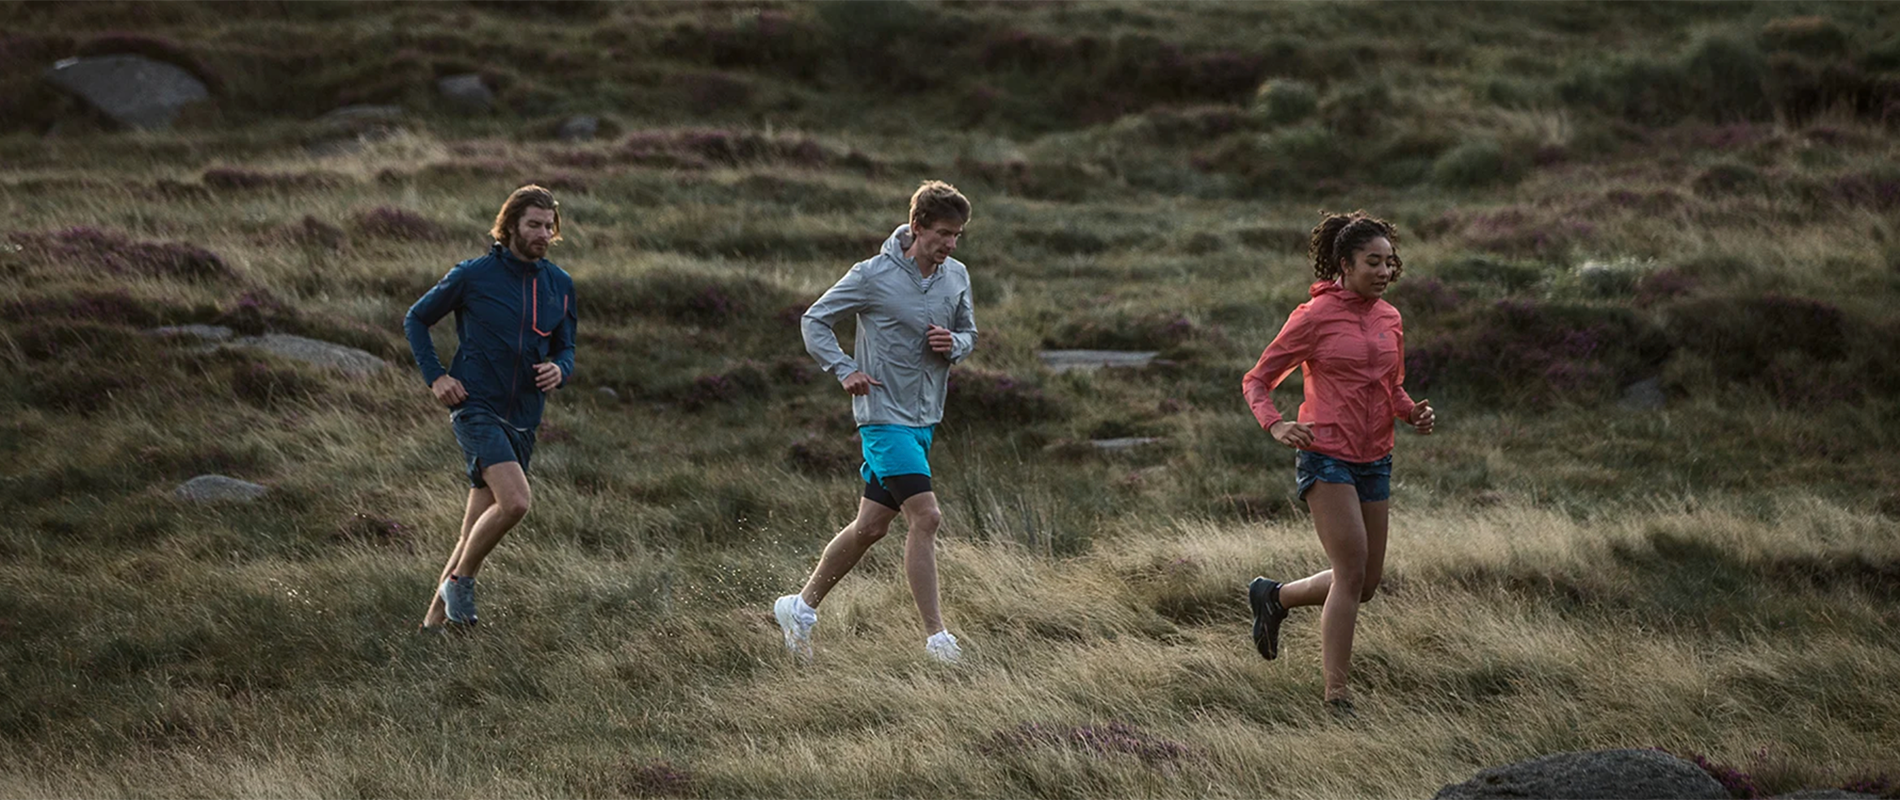 HOW TO CHOOSE YOUR TRAIL RUNNING SHOES